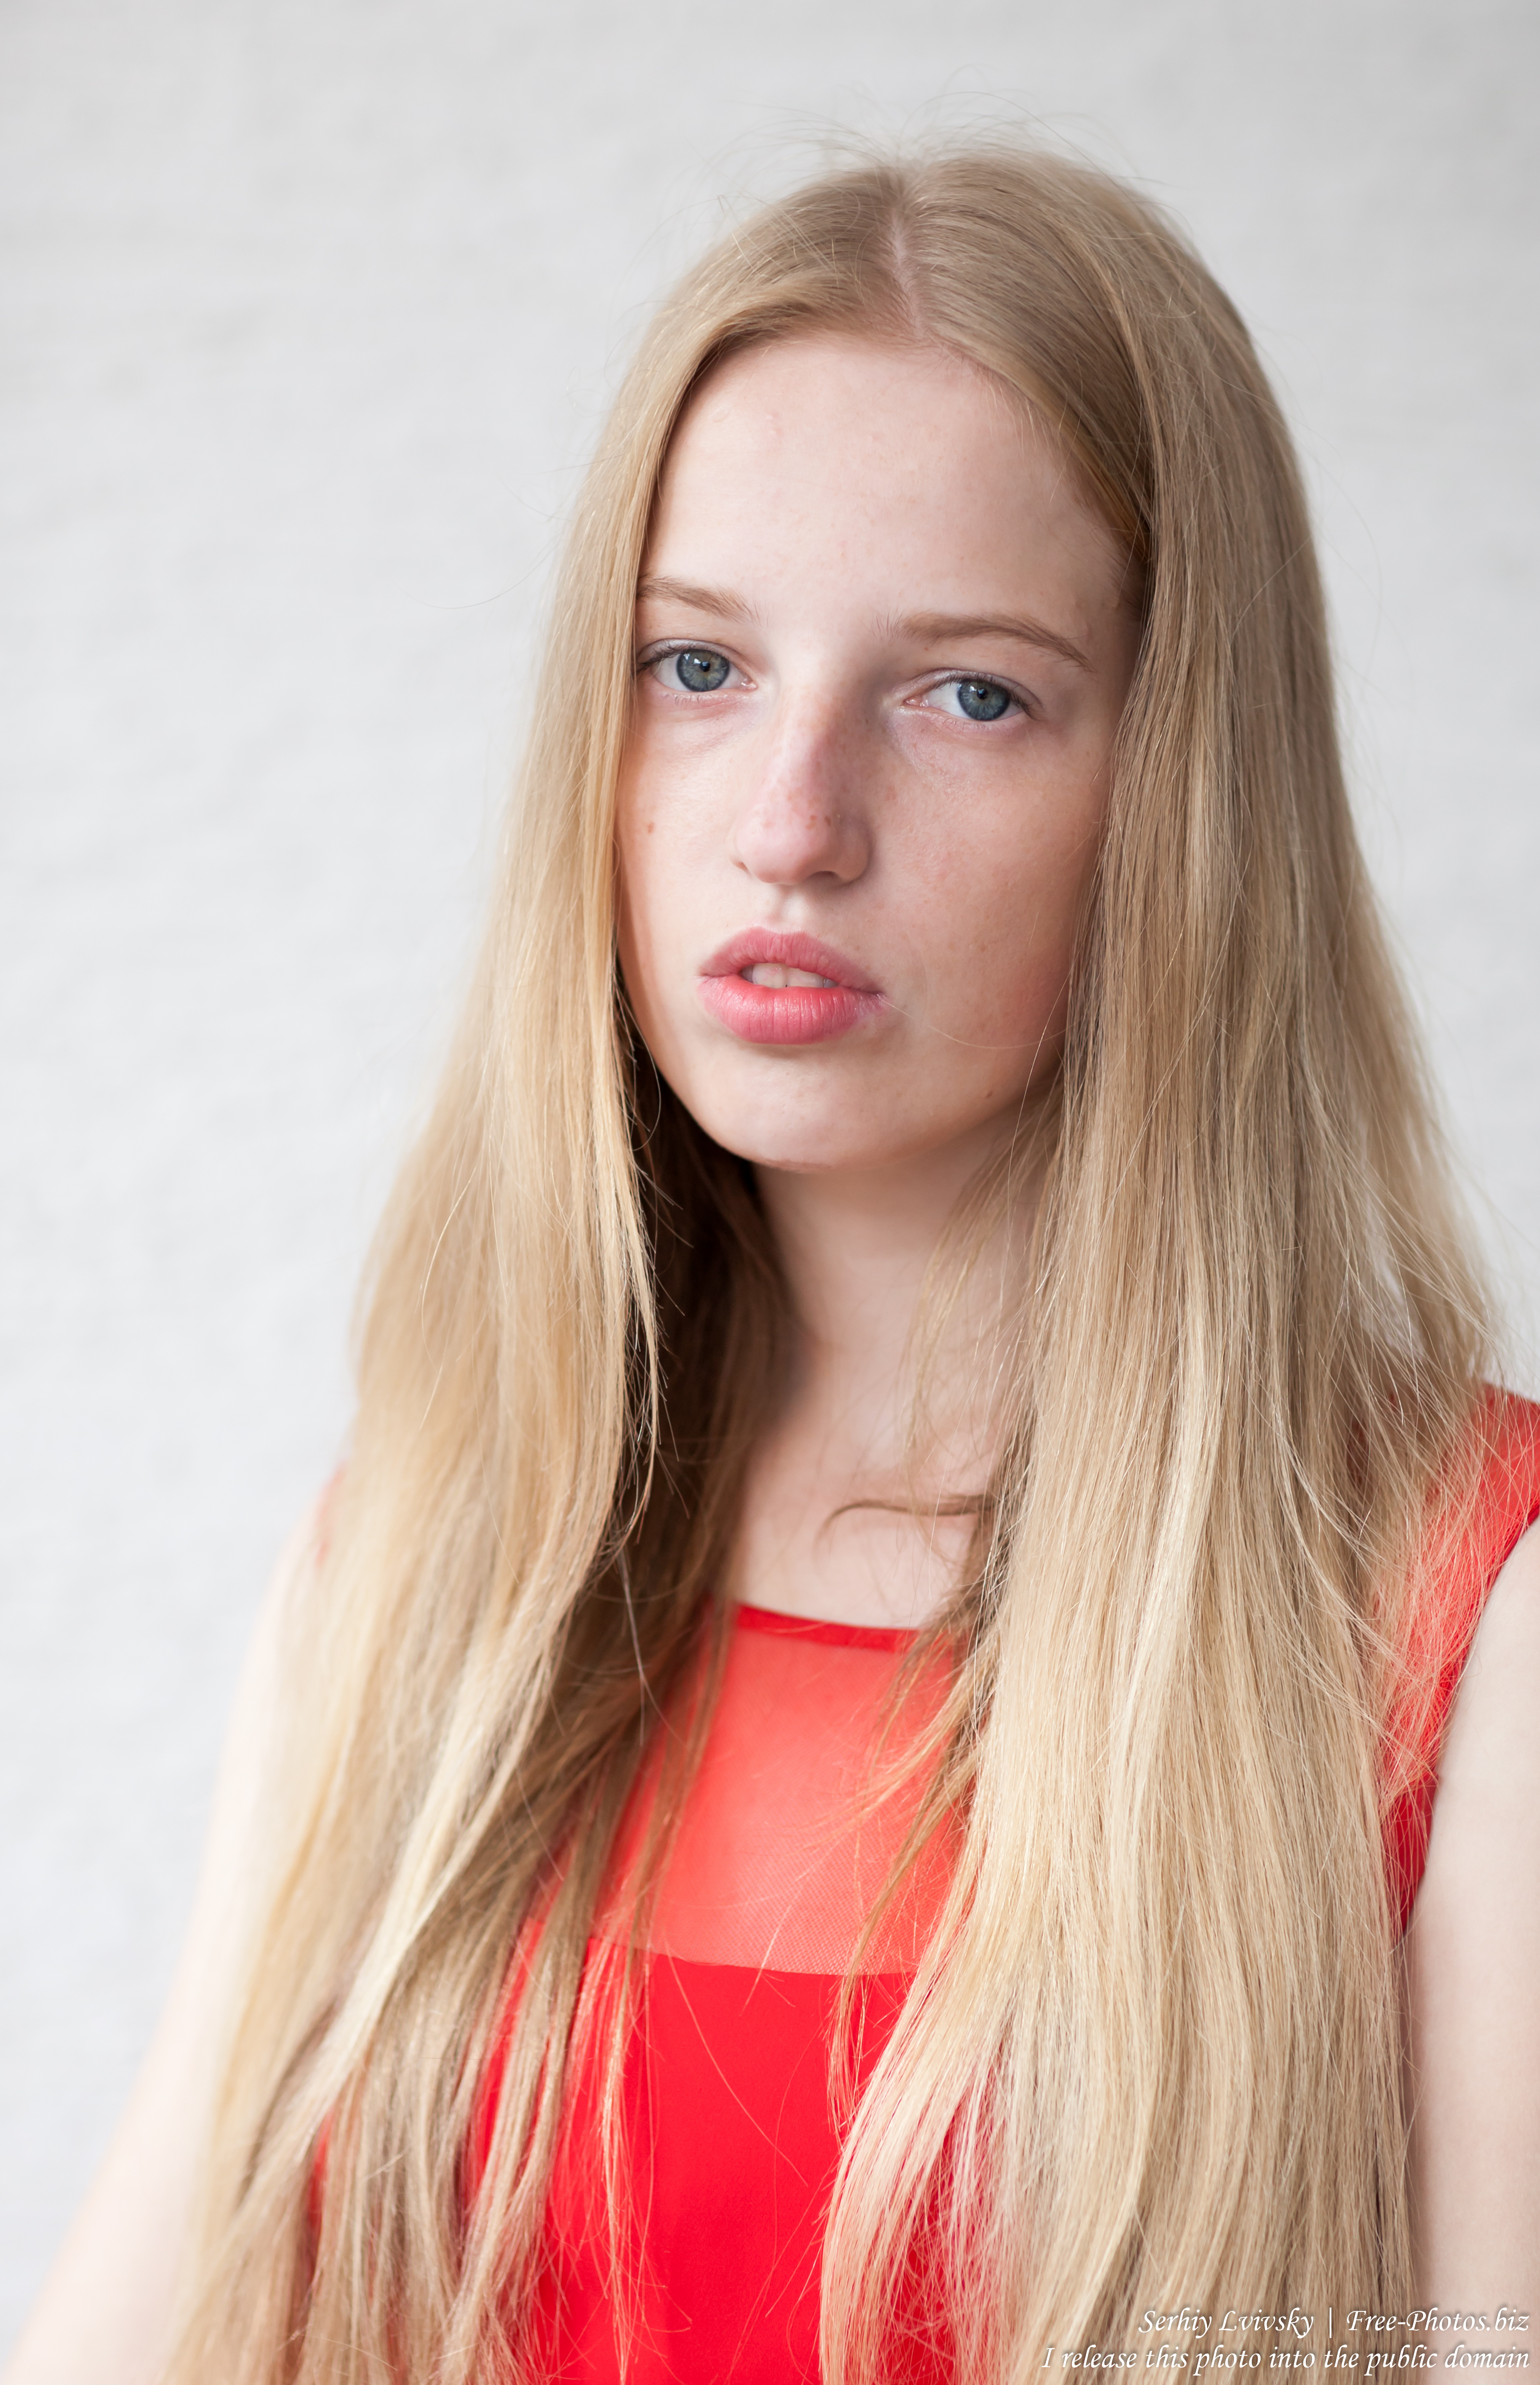 a 17-year-old Catholic natural blond girl photographed in September 2016 by Serhiy Lvivsky, picture 17